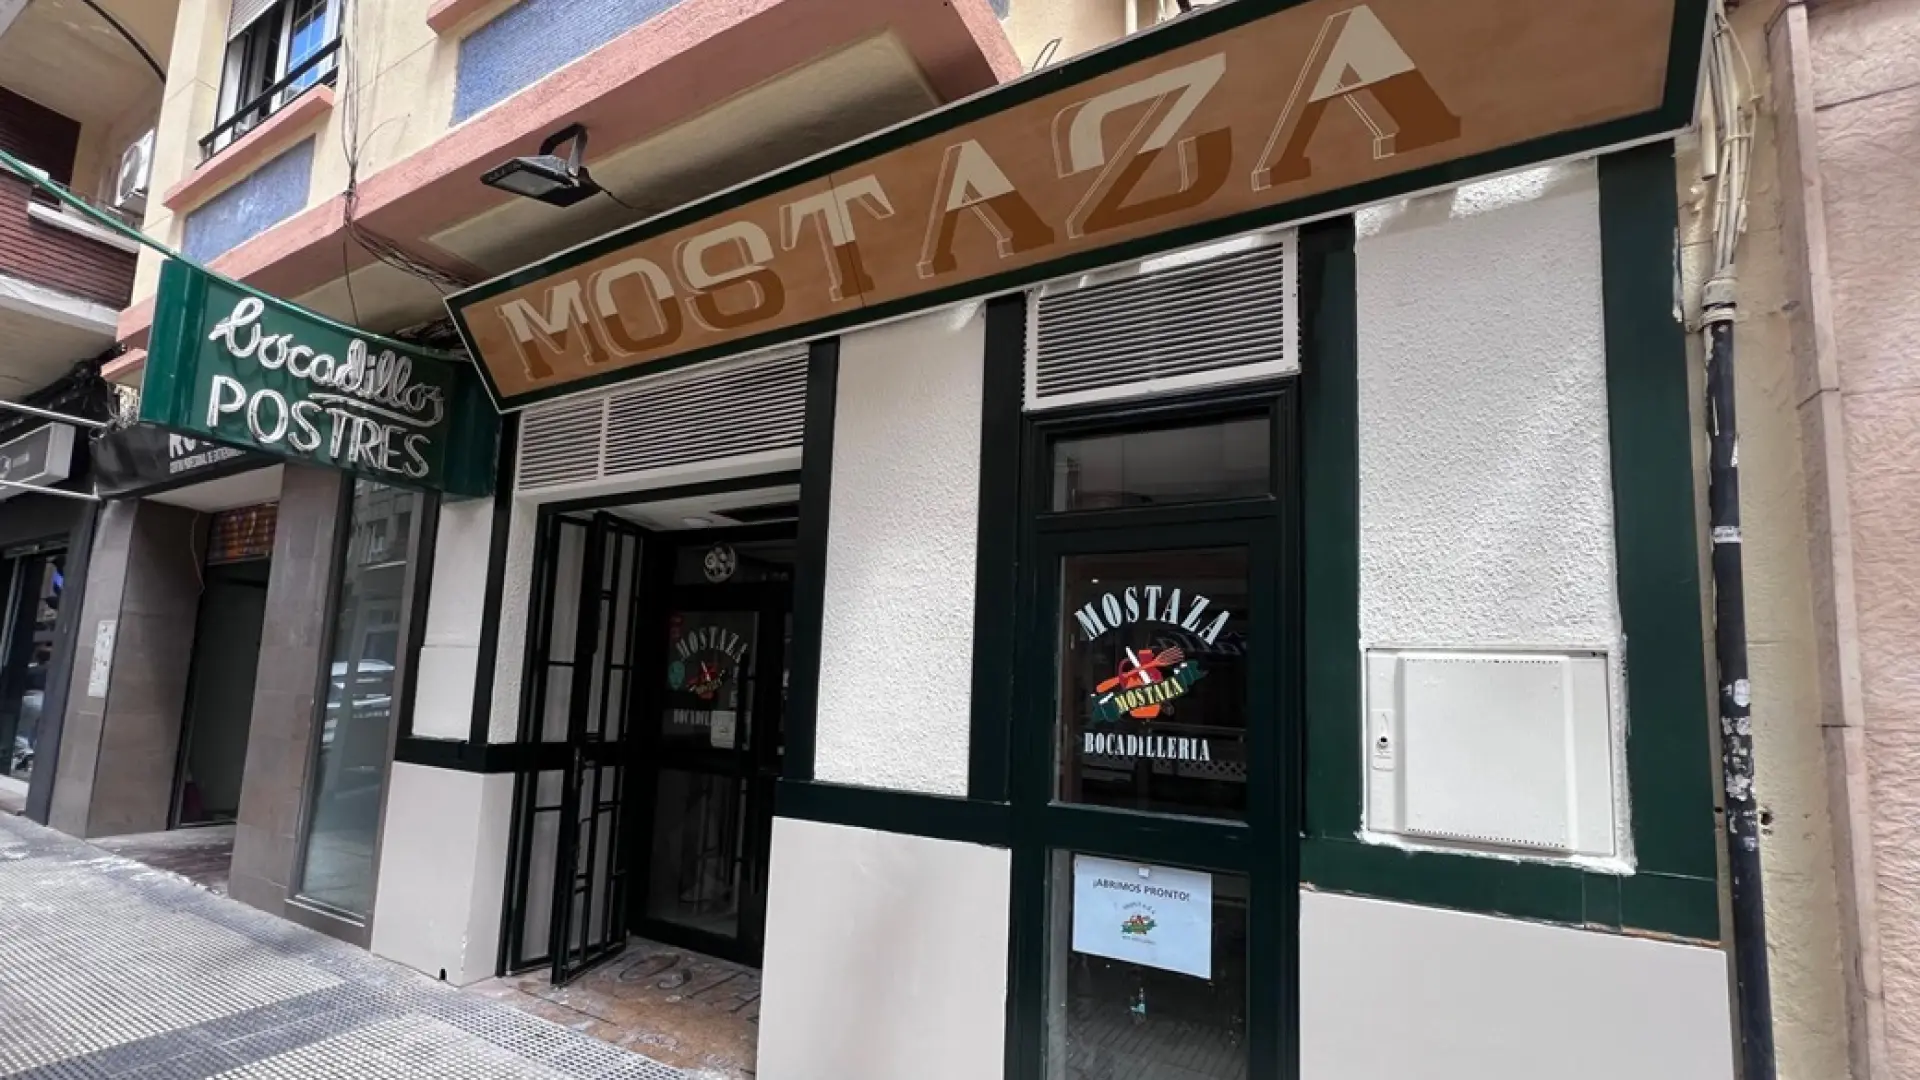 Bar Mostaza is reopening in Zaragoza, famous for its gourmet sandwiches.